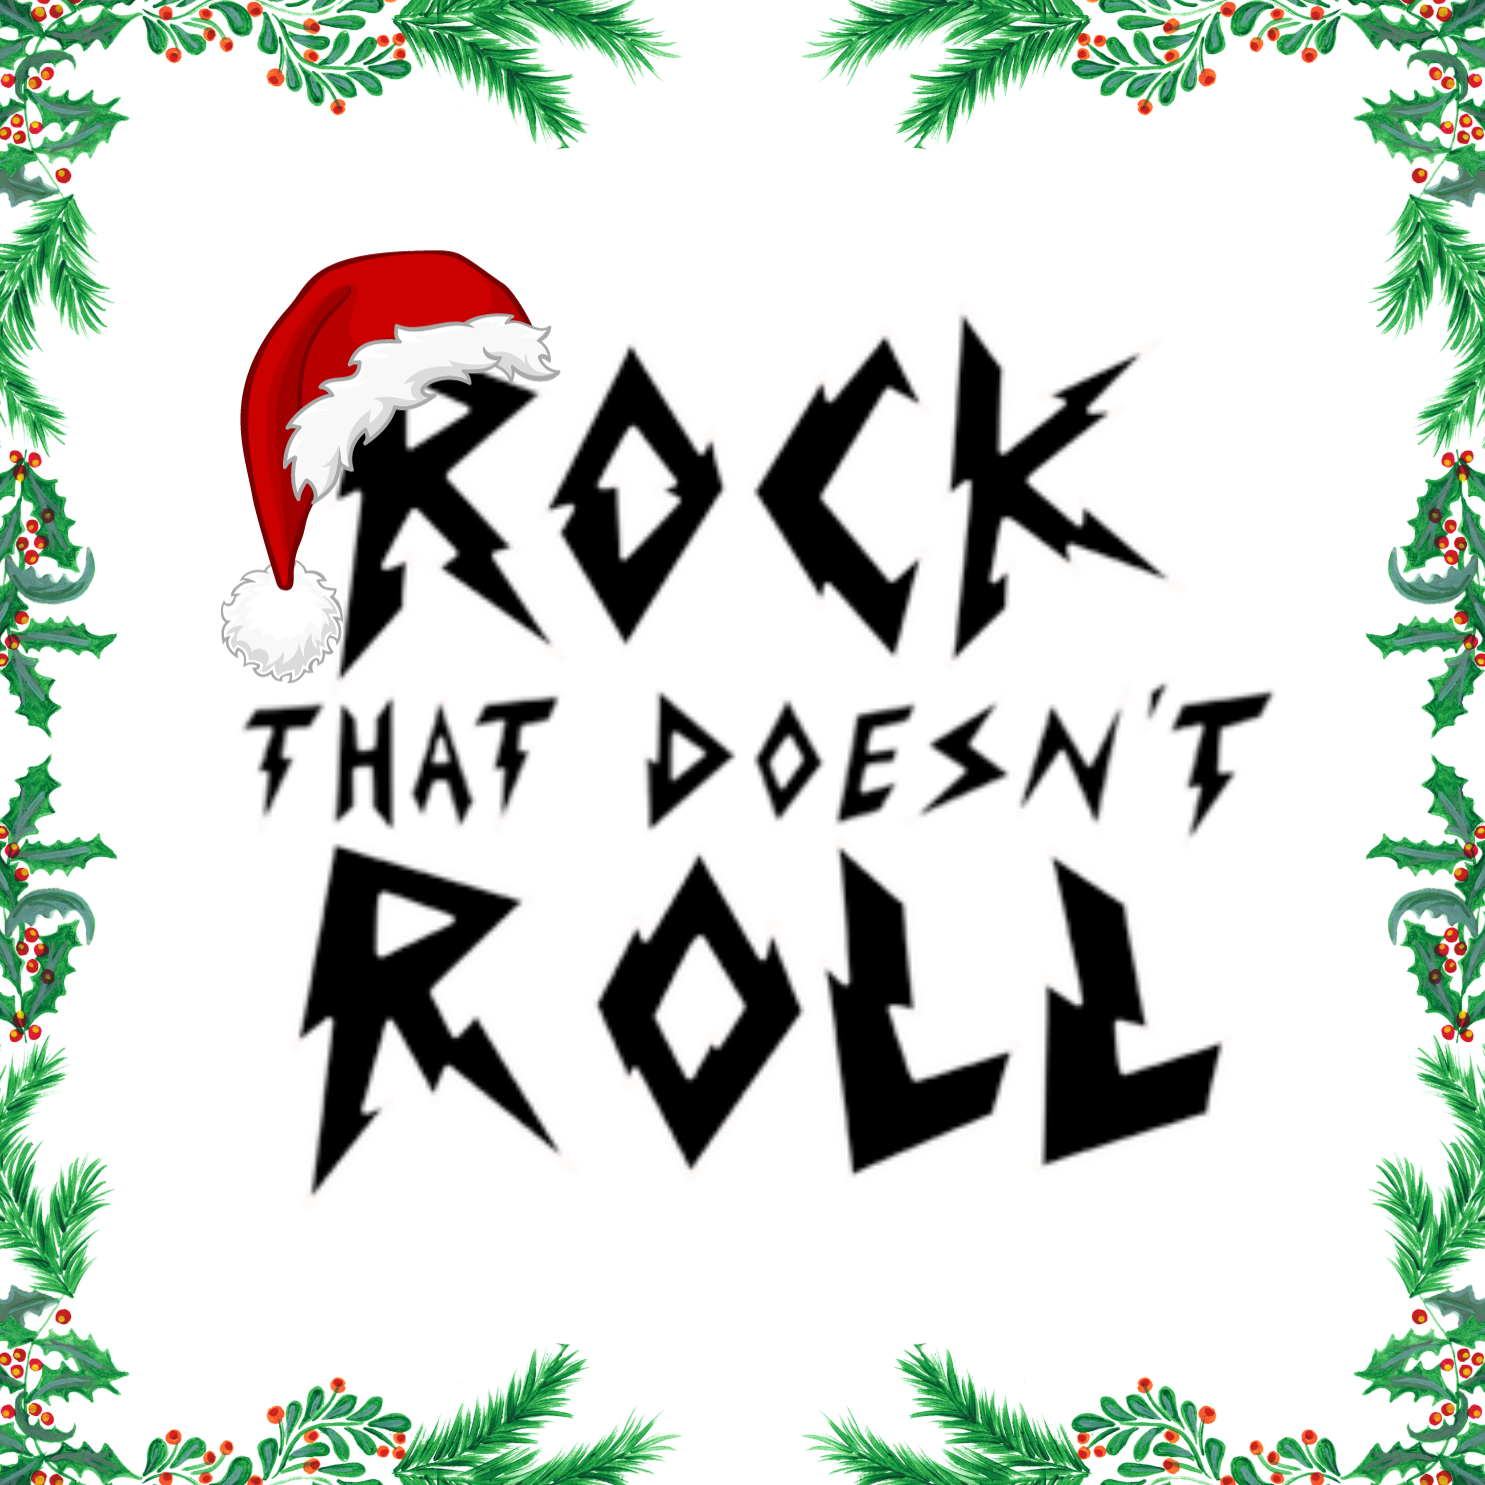 It's Christmastime! CCM Christmas Music Awards from Rock That Doesn't Roll